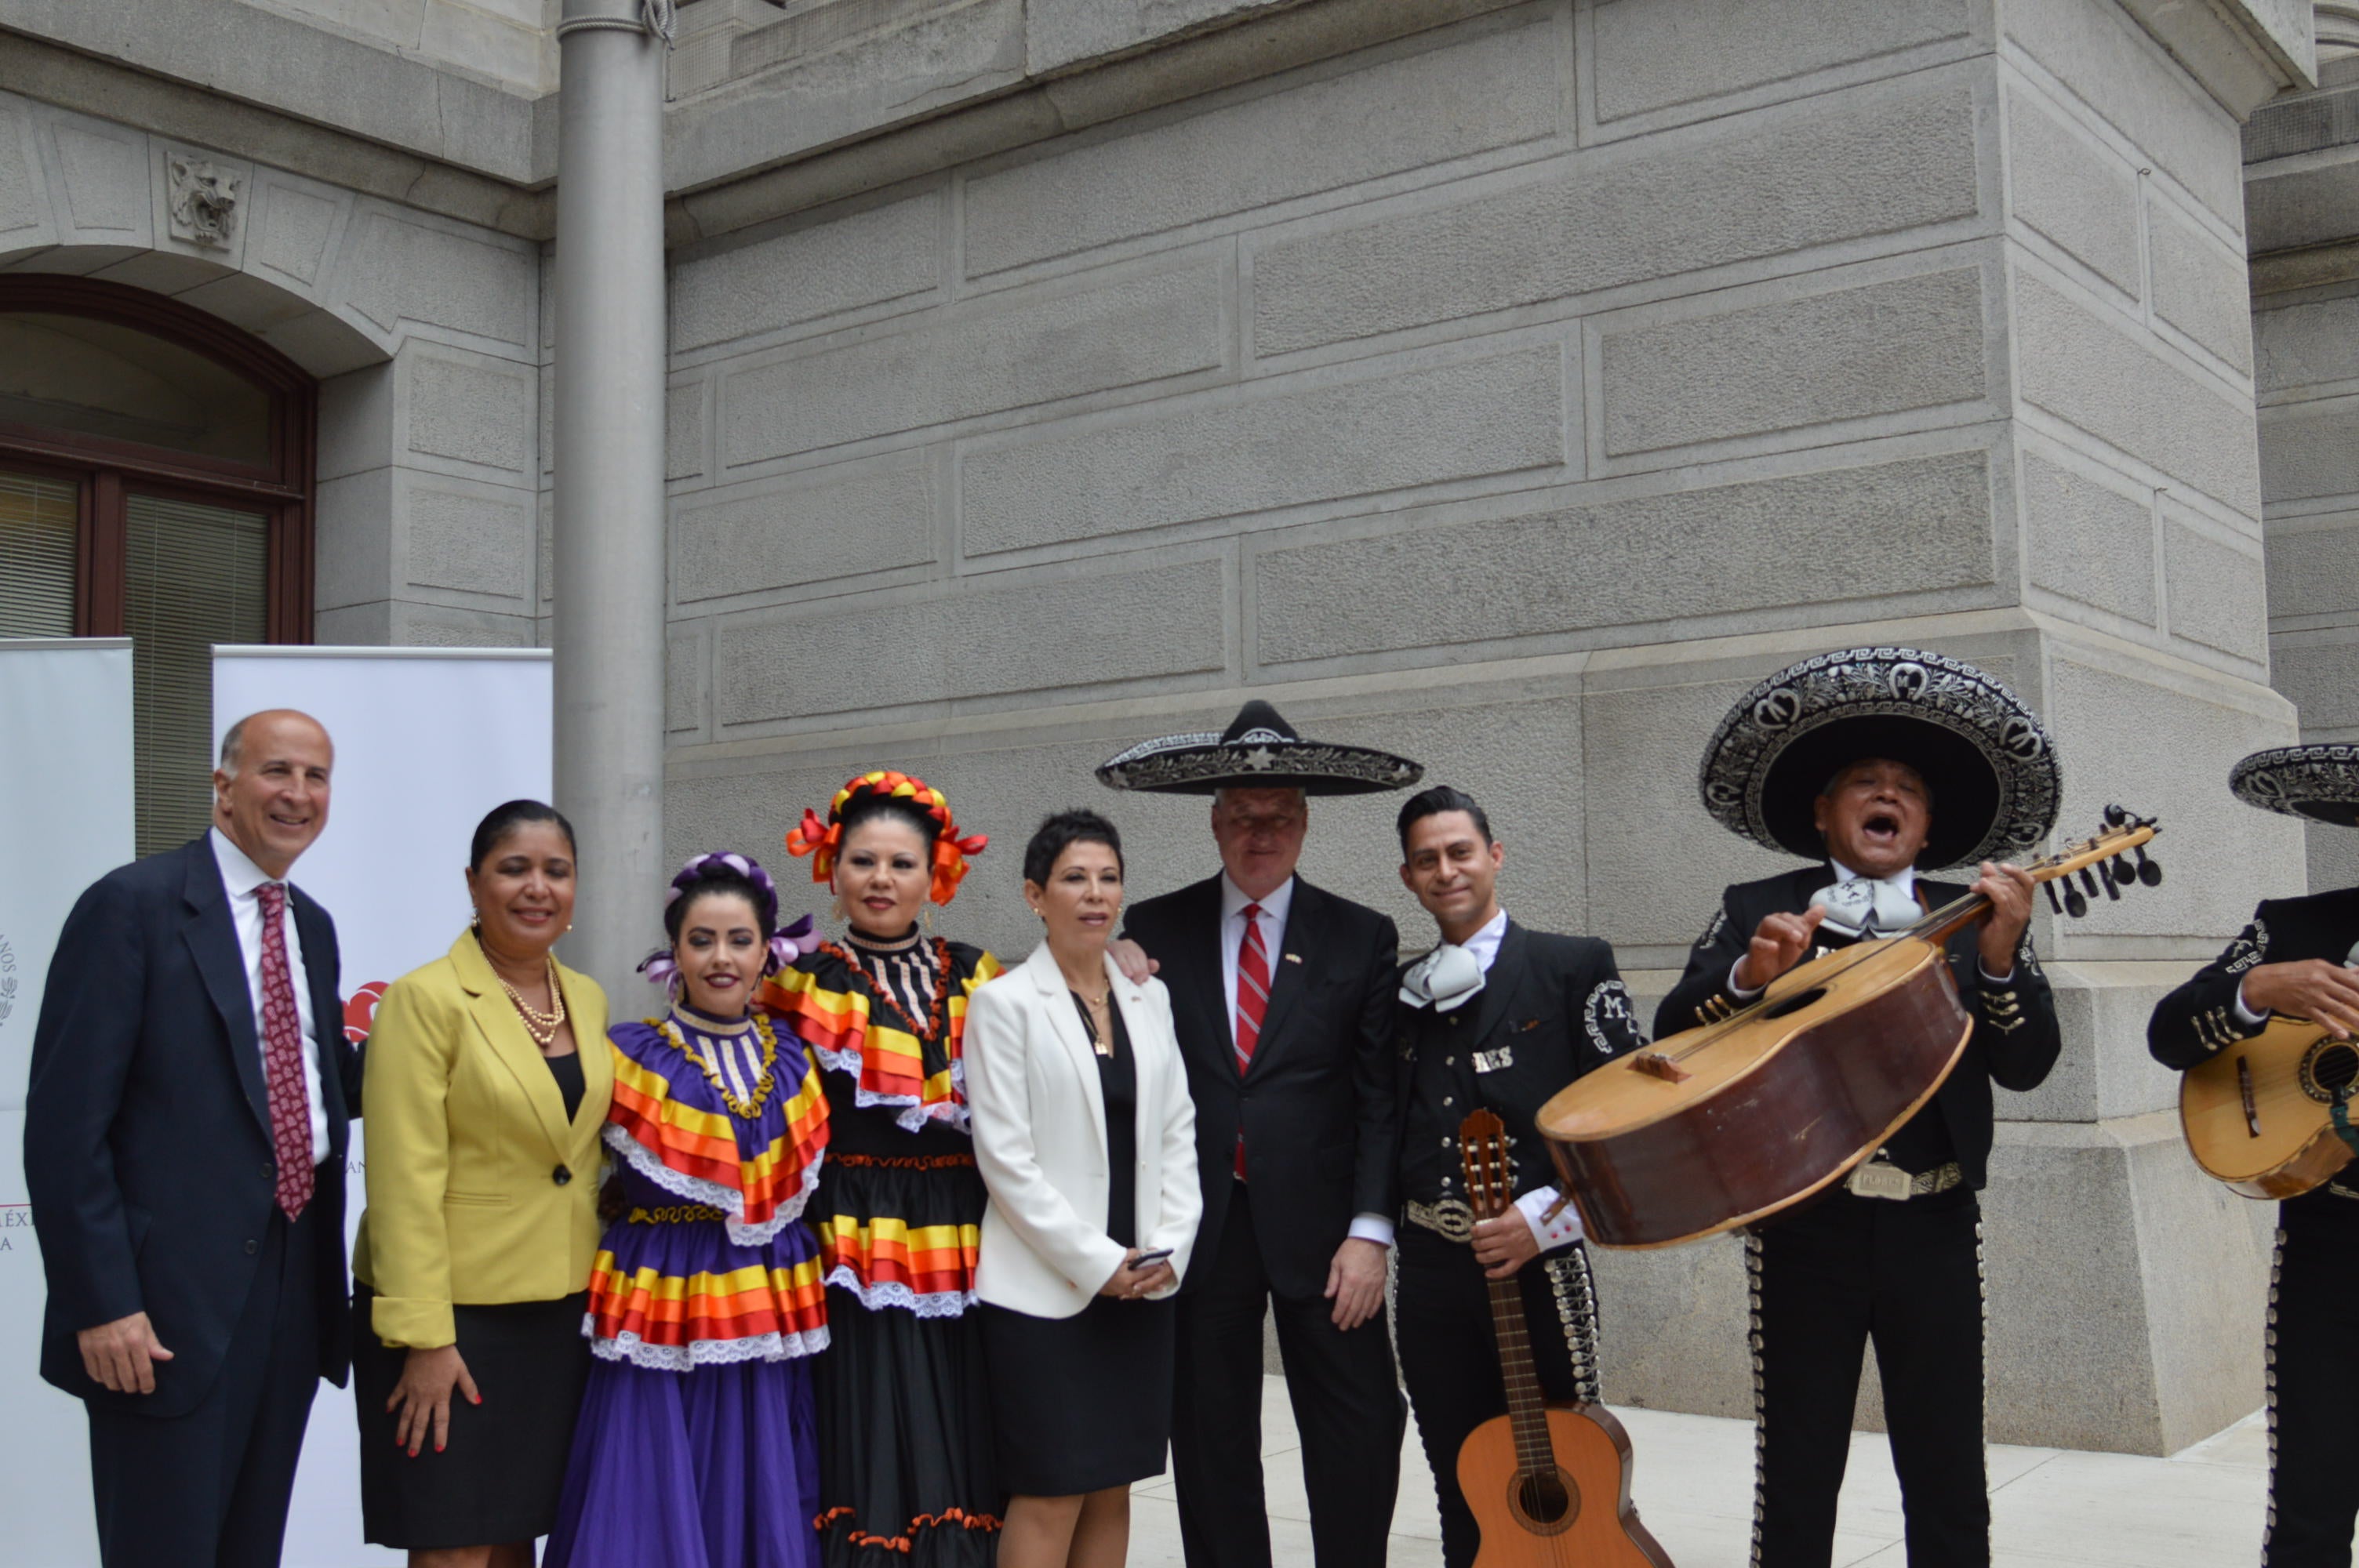  A sombrero-wearing Mayor Jim Kenney (third from right) and Alicia Kerber-Palma, Mexico's consulate general Alicia Kerber-Palma (fourth from right) take part in Mexican flag-raising ceremonies at Philadelphia City Hall. (Tom MacDonald/WHYY) 